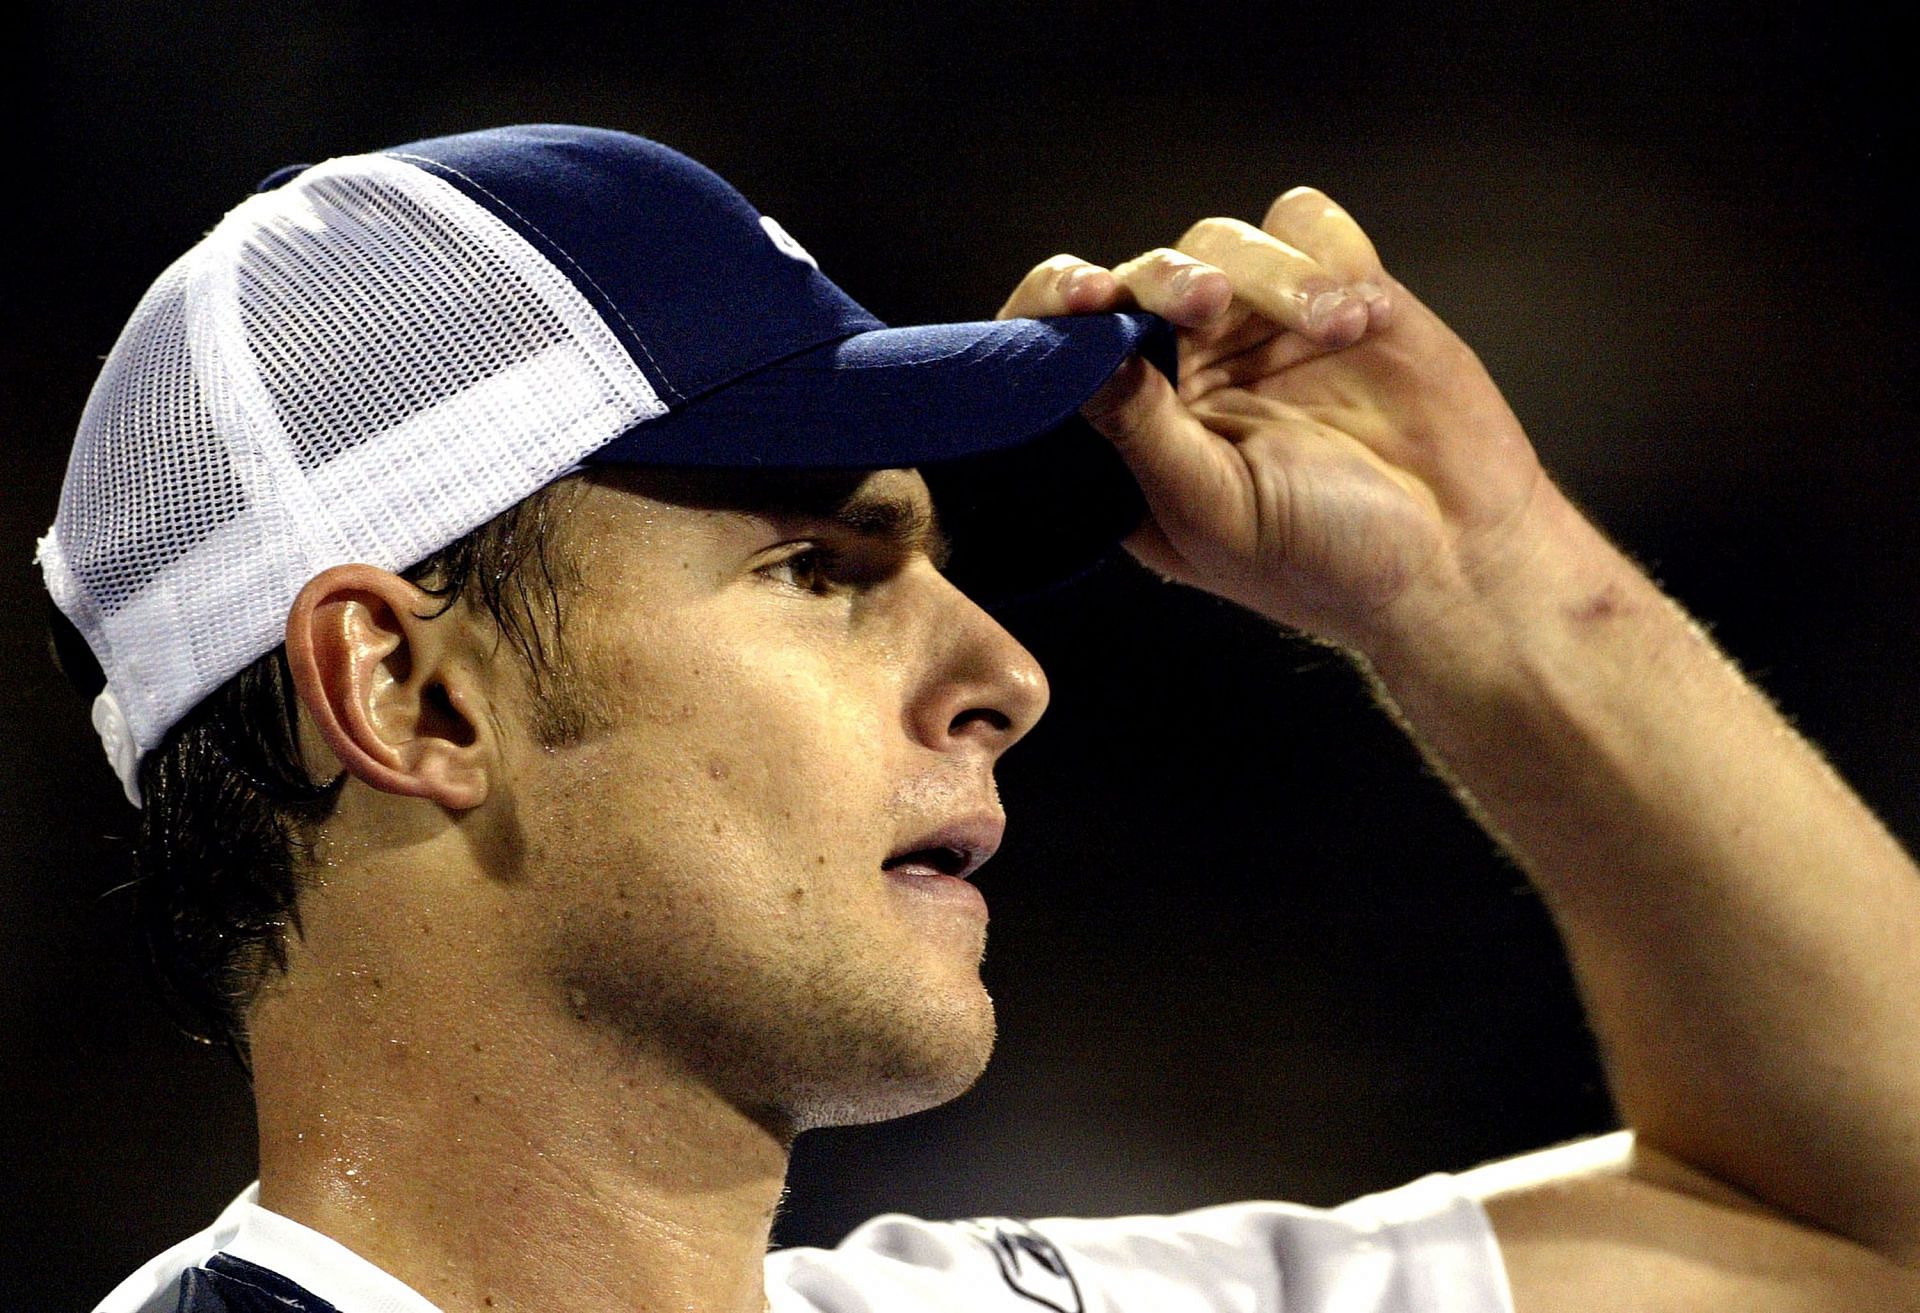 Andy Roddick looks on during a match